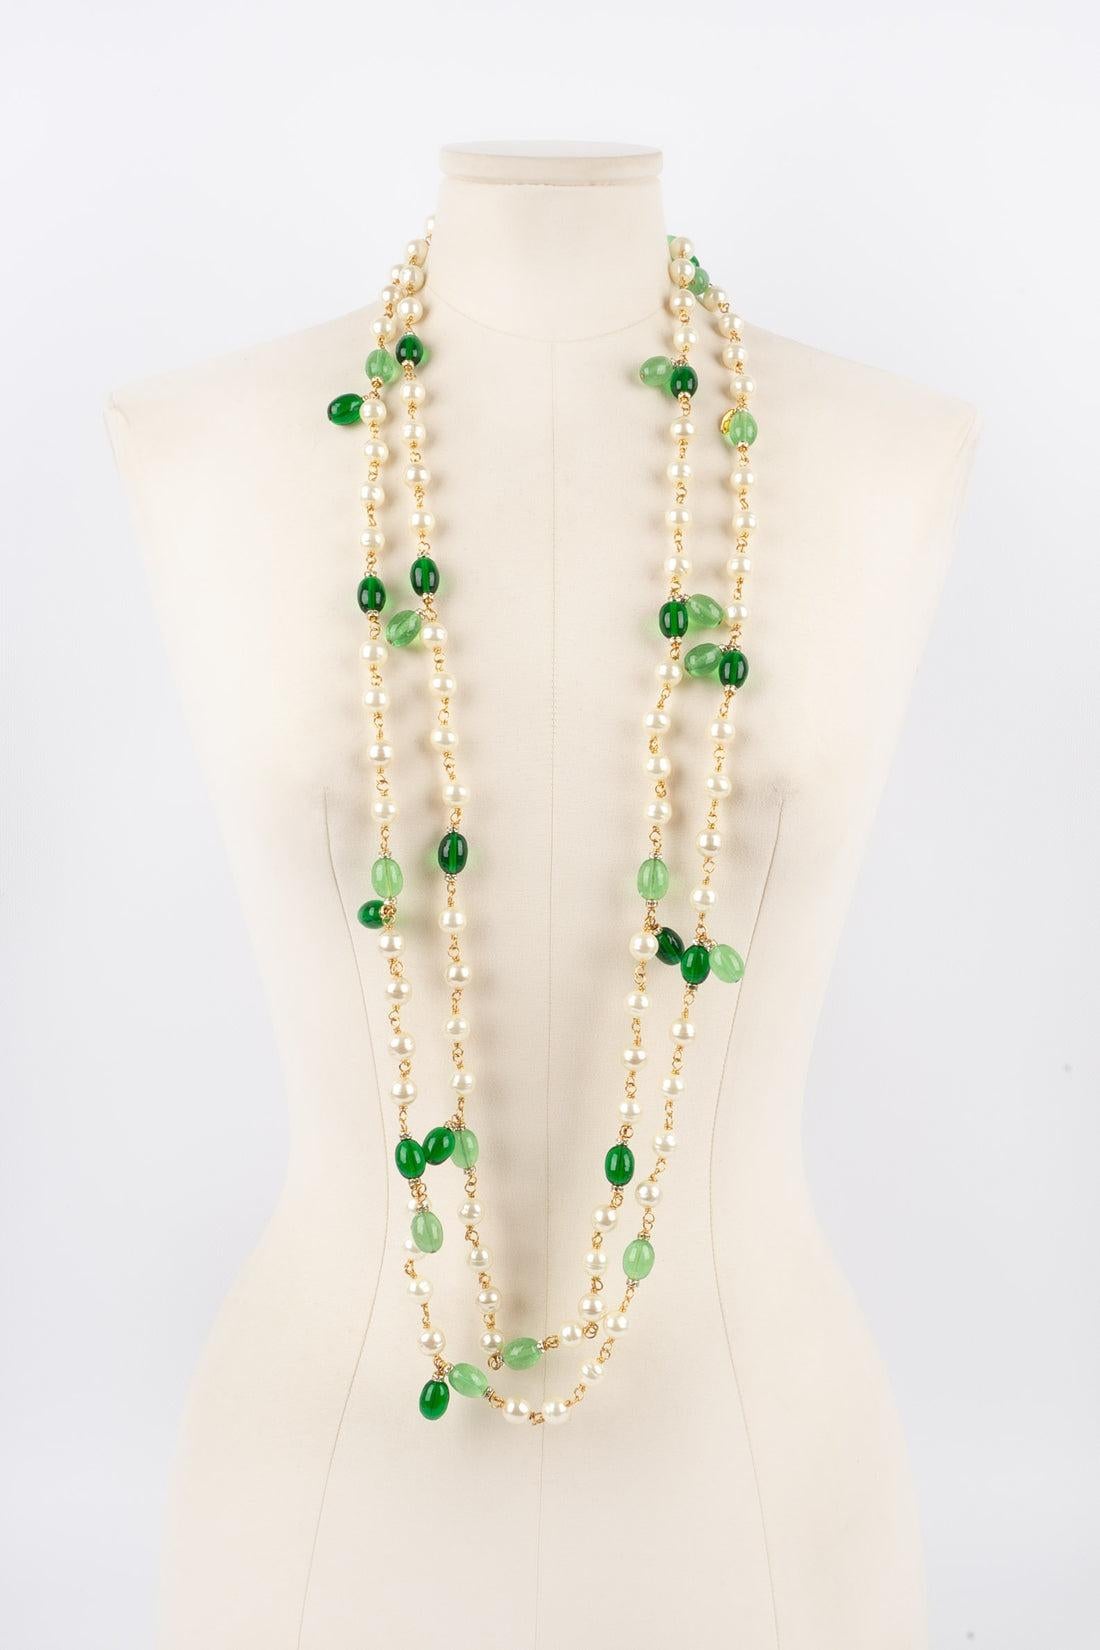 Chanel - (Made in France) Sautoir with costume pearls, green glass pearls, and Swarovski rhinestone rings. Necklace without fastener. 1984 Collection.

Additional information:
Condition: Very good condition
Dimensions: Length: 220 cm
Period: 20th